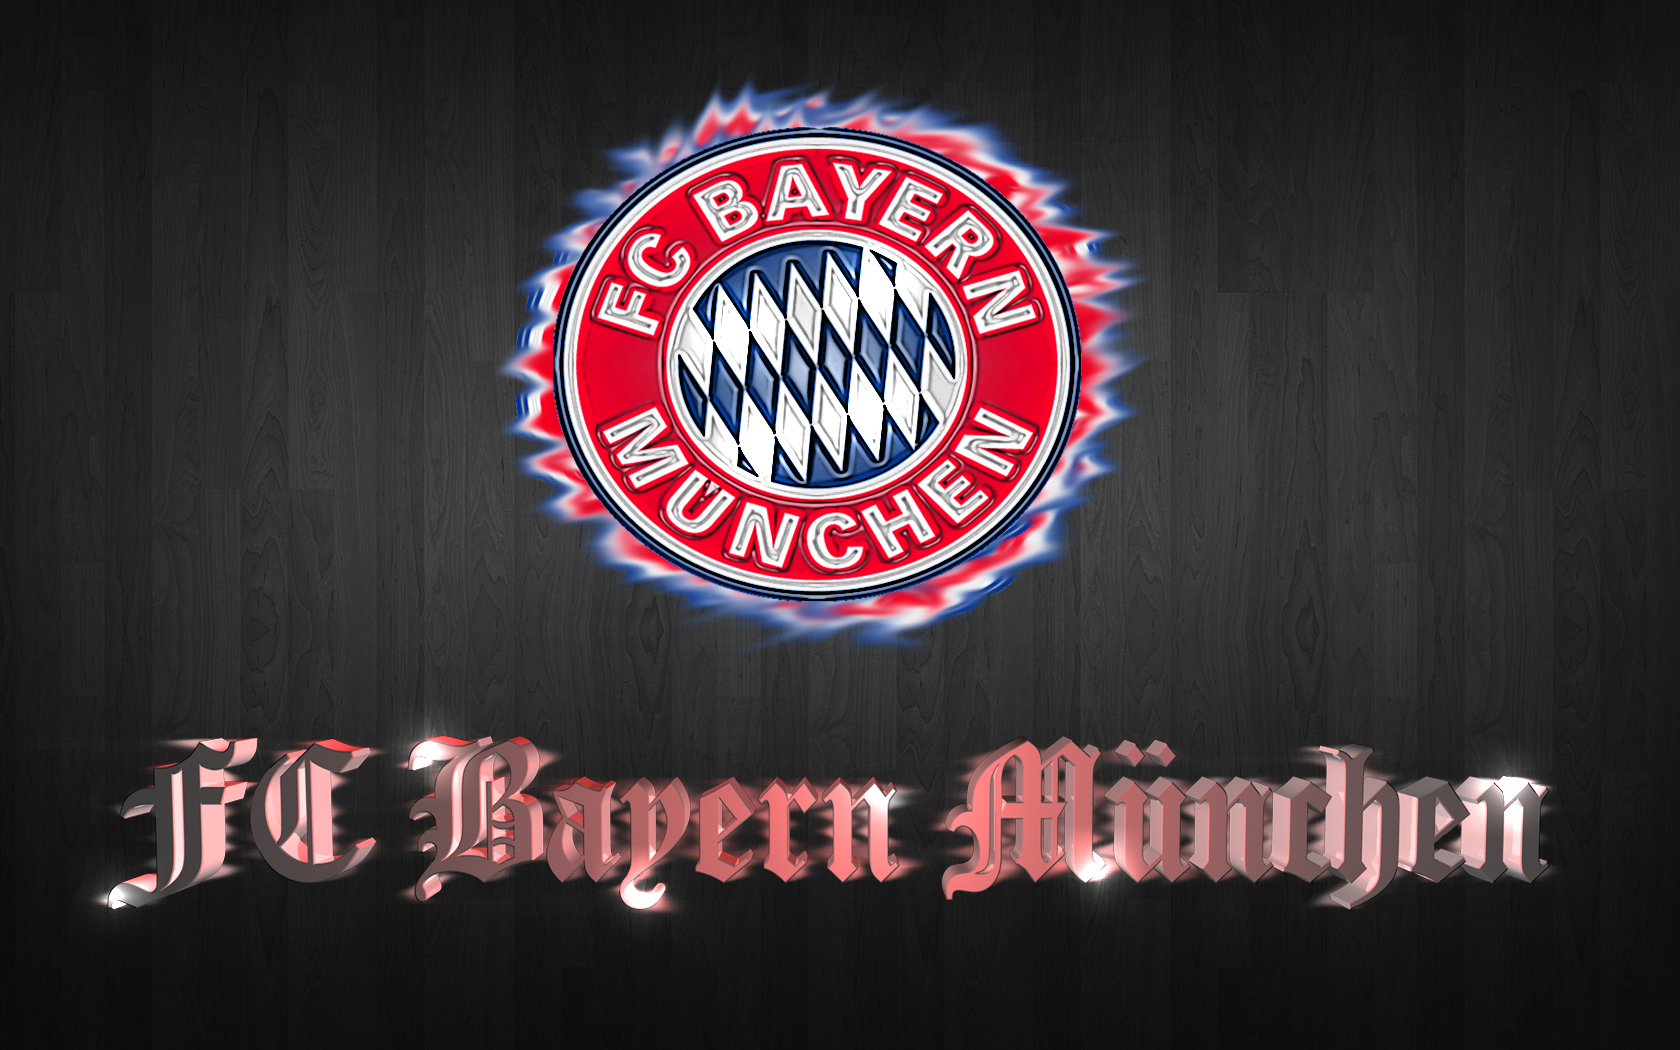 Free Download Fc Bayern Munchen Page2 1680x1050 For Your Desktop Mobile Tablet Explore 97 Fc Bayern Munich 2017 Wallpapers Fc Bayern Munich 2017 Wallpapers Fc Bayern Munich Wallpaper Fc Bayern Munich Wallpapers